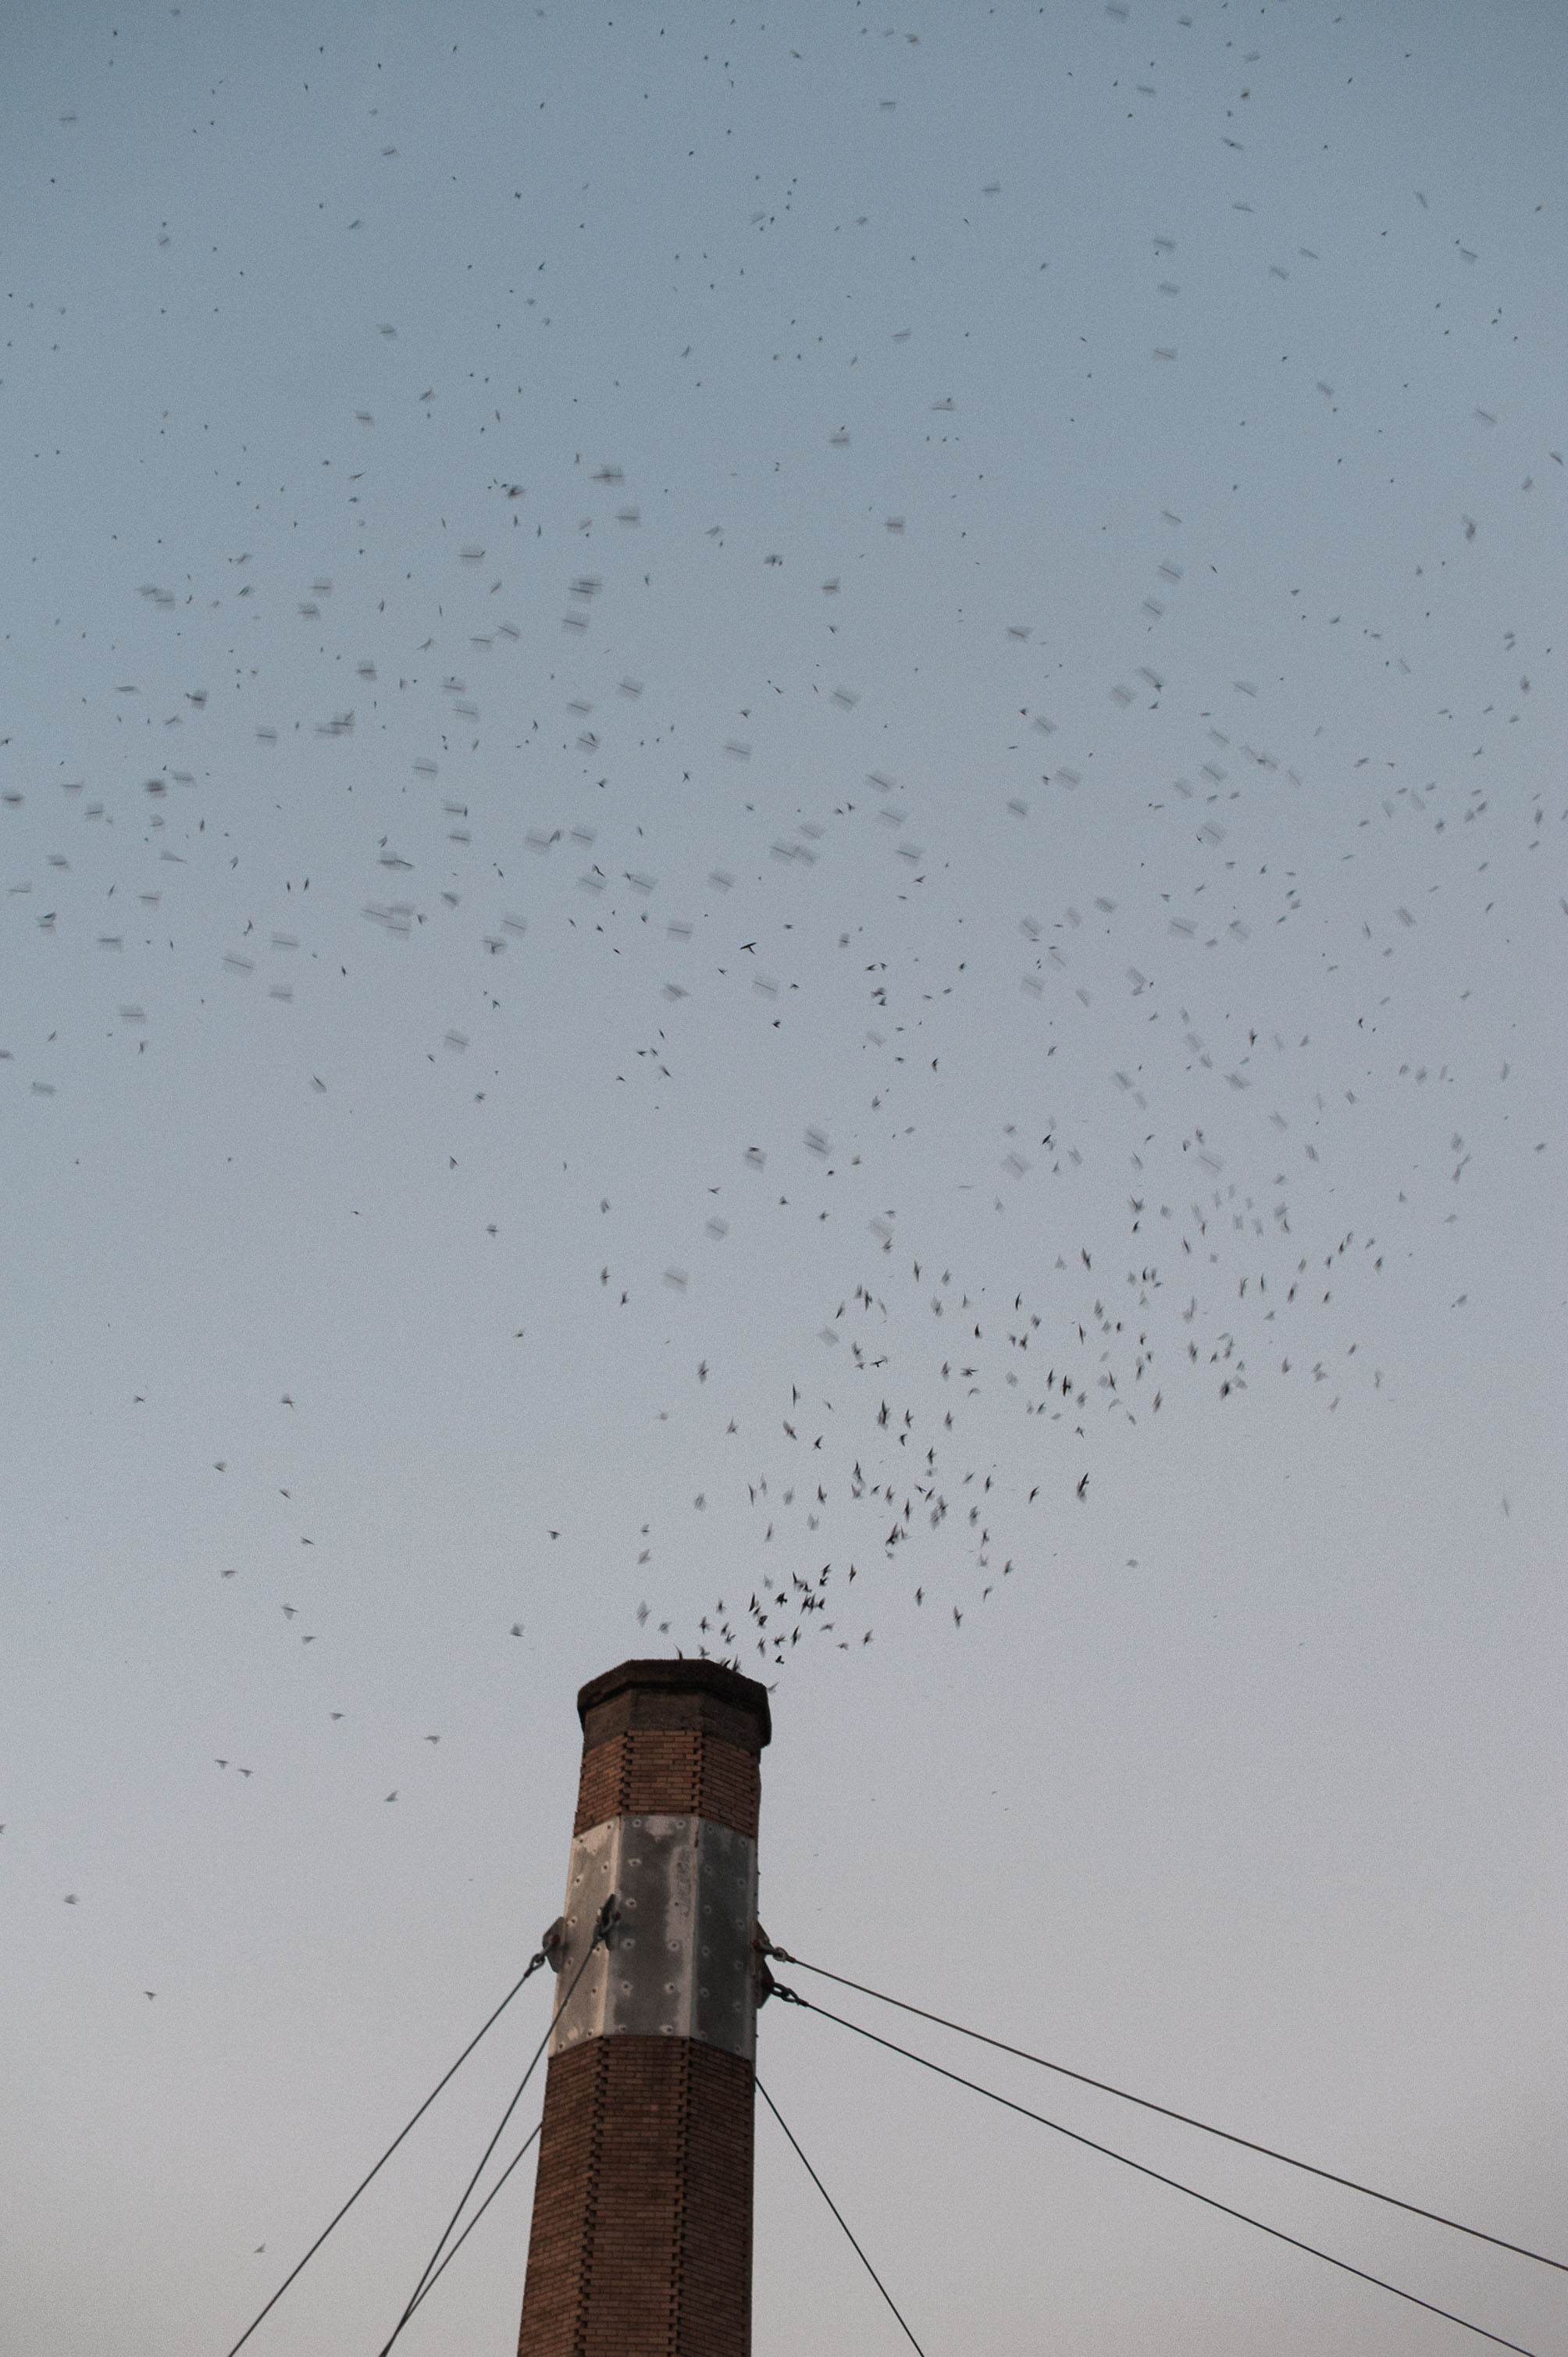 Thousands of Swifts descend into a chimney at dusk. Chapman School Swifts captured by photographer Briana Morrison